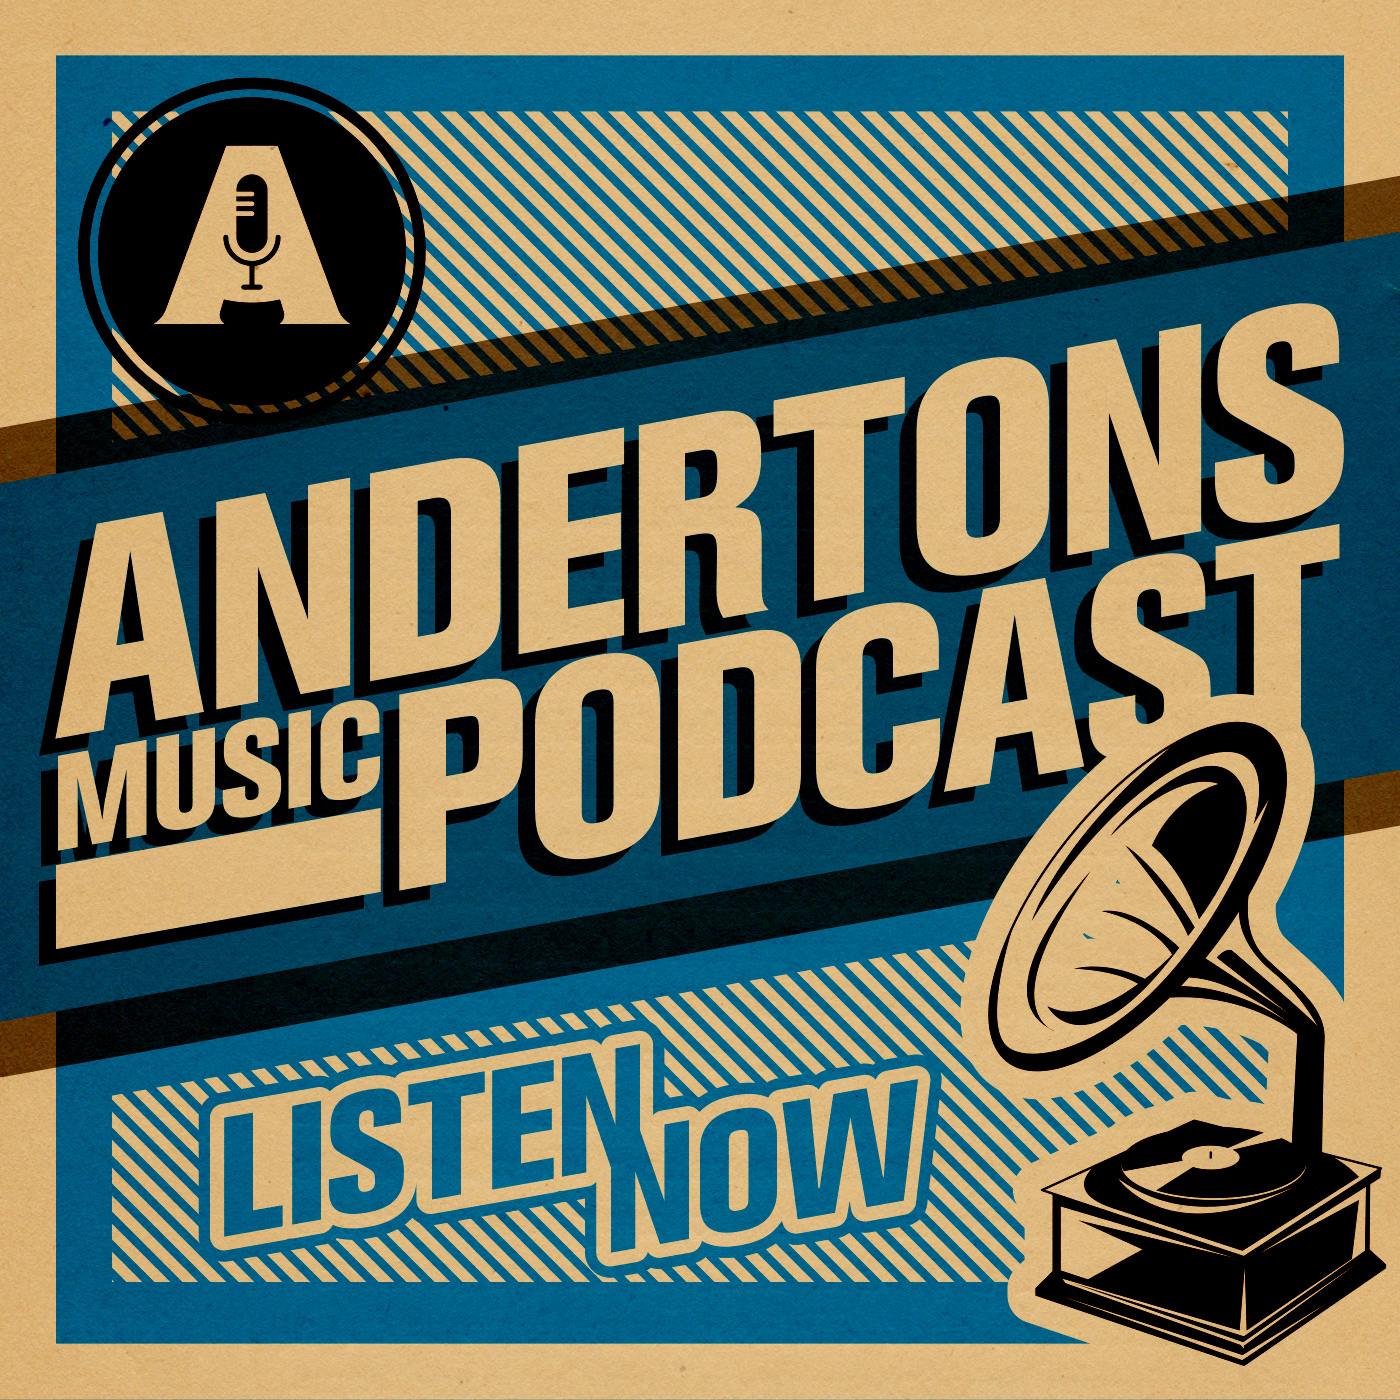 The Andertons Music Podcast